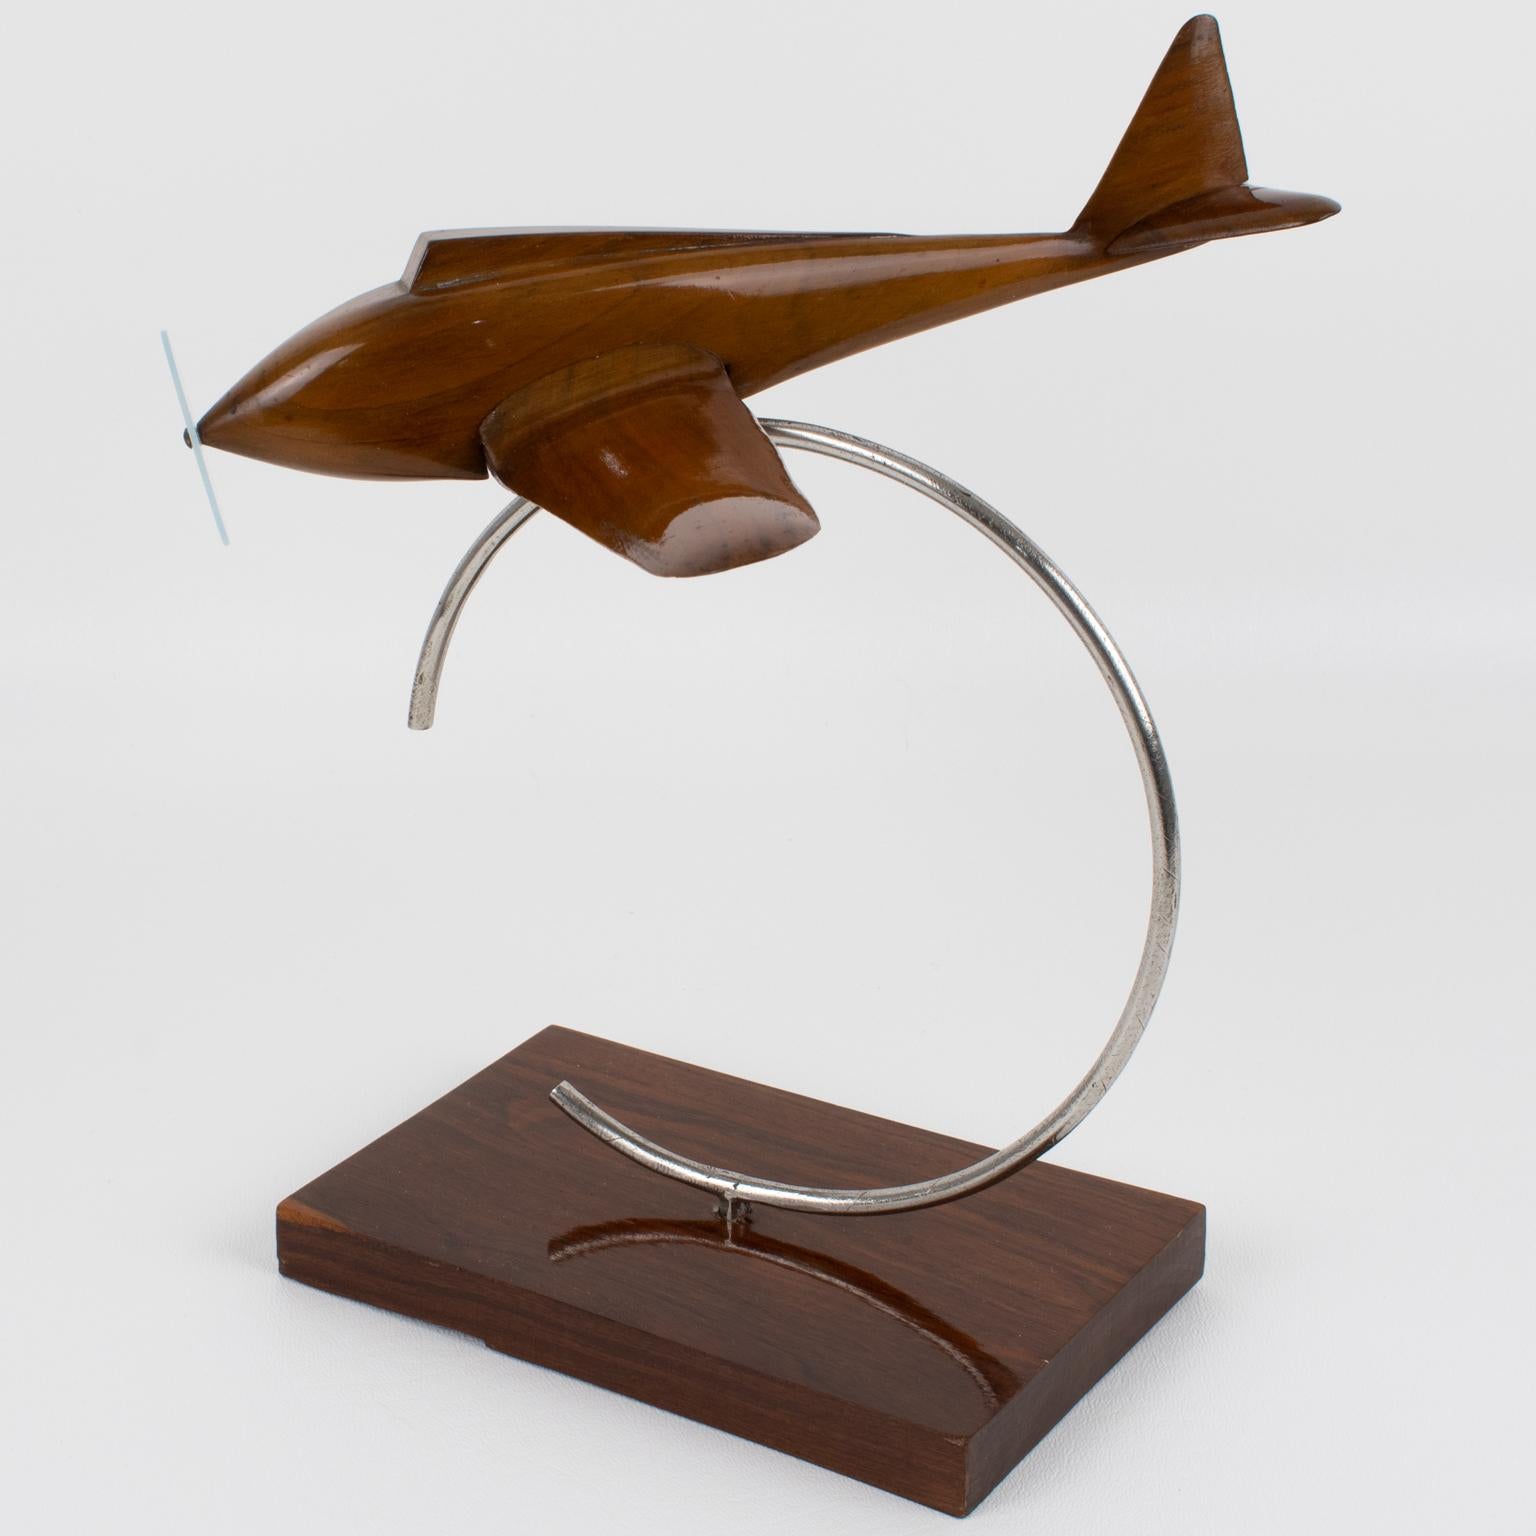 French Art Deco Wood and Metal Airplane Aviation Propeller Model, France 1930s For Sale